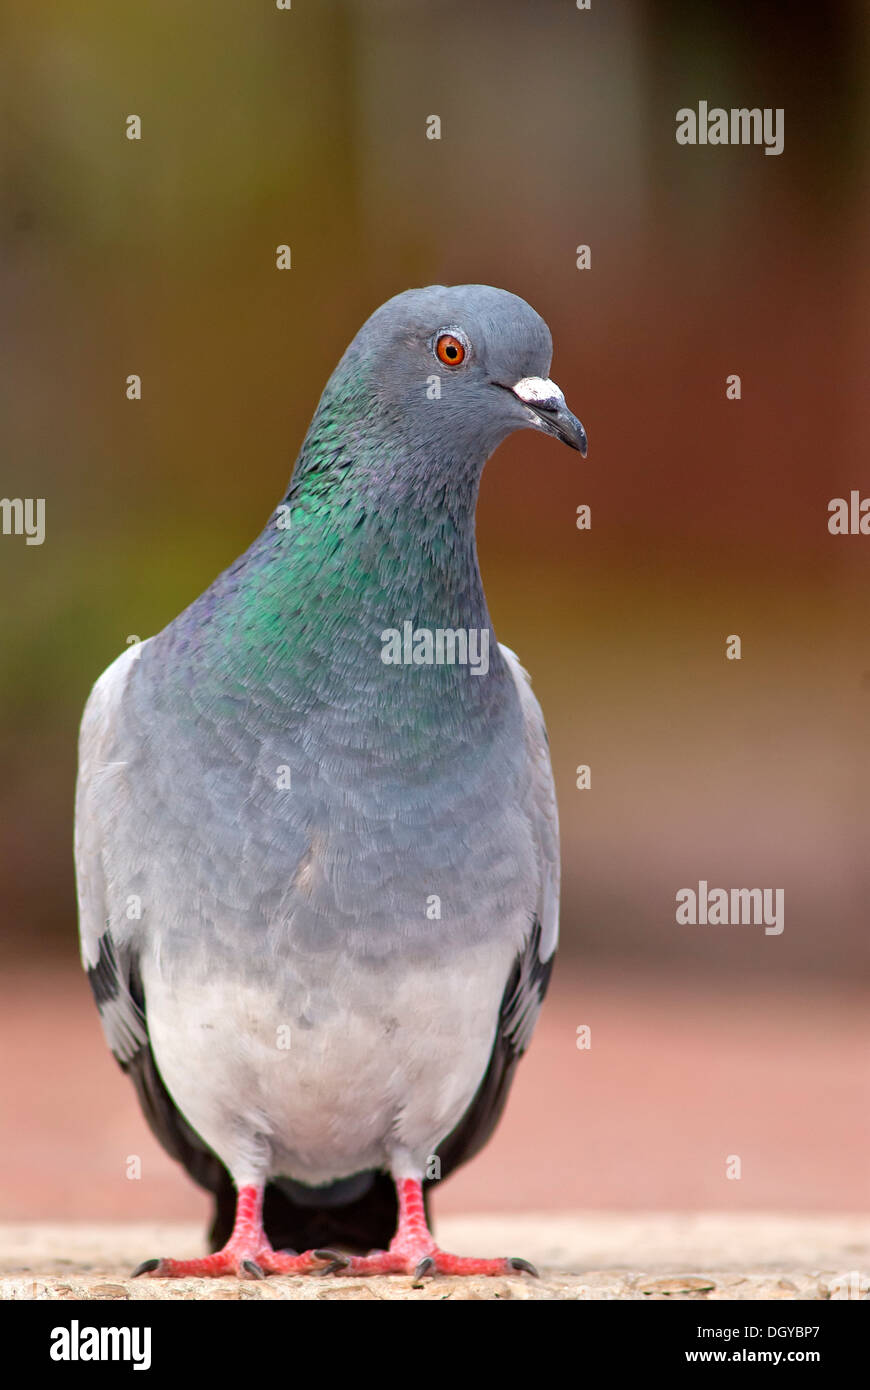 Pigeon in front view Stock Photo